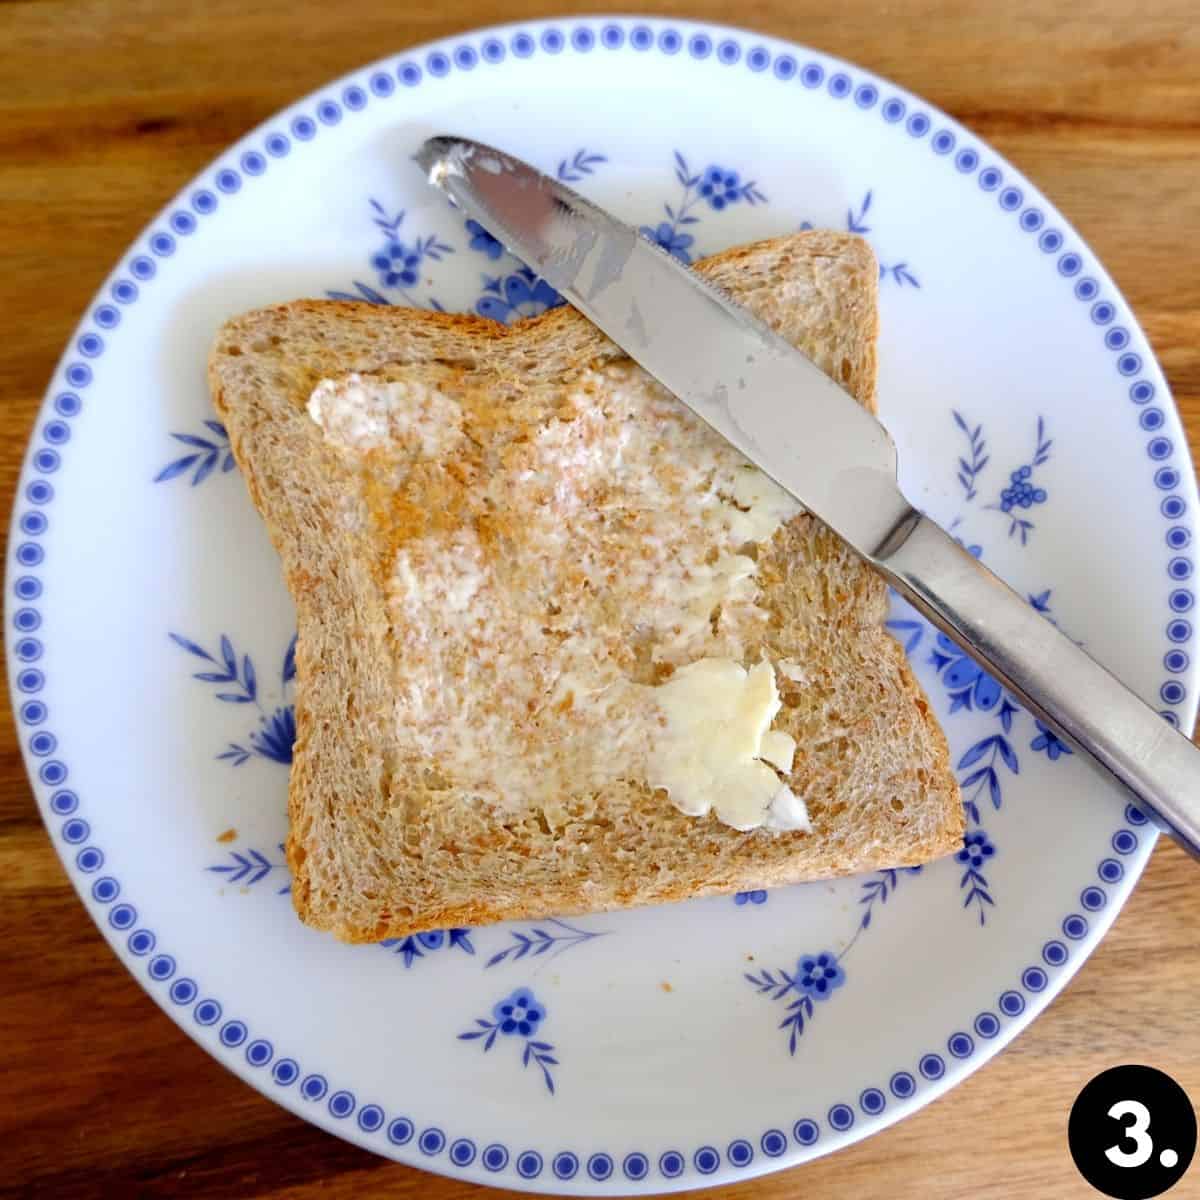 Toast with butter.